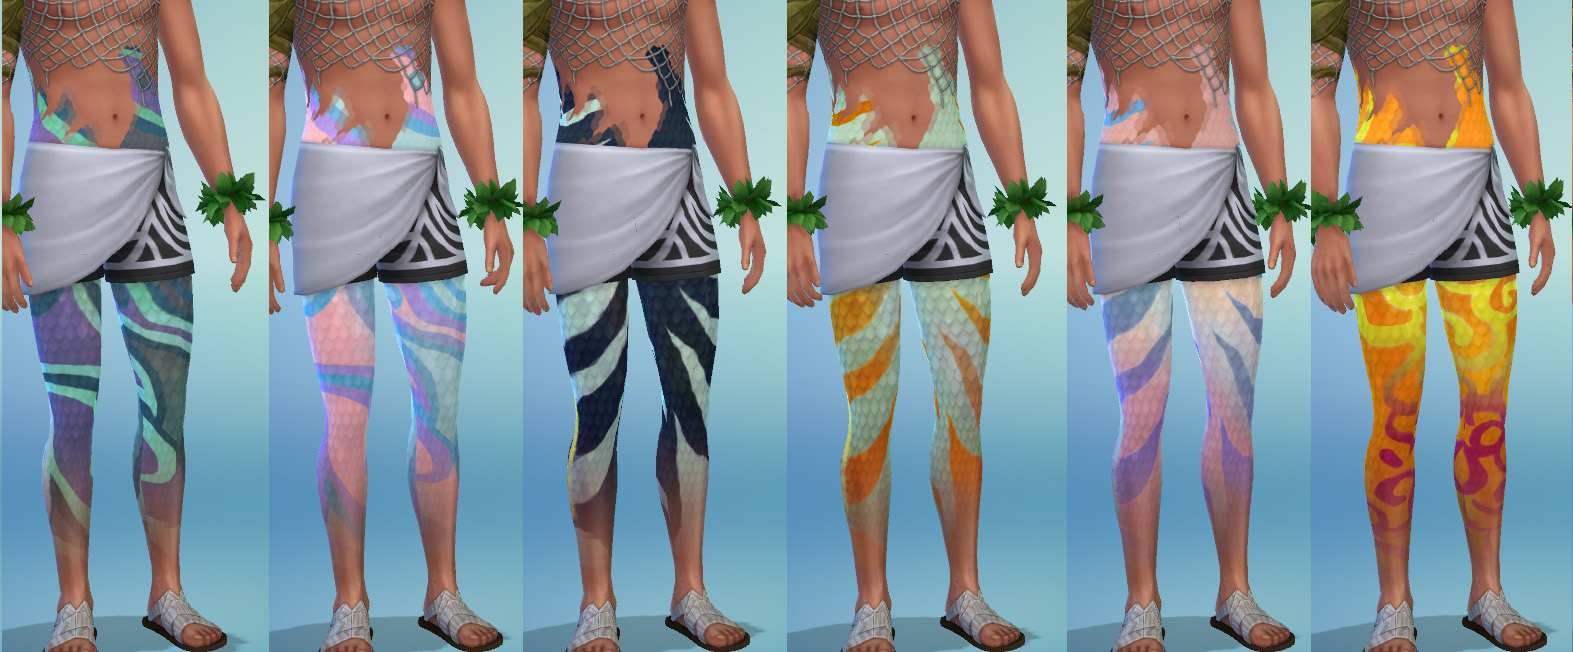 Mod The Sims - Leg scales for mermaids + chest scales for male (22 swatches)